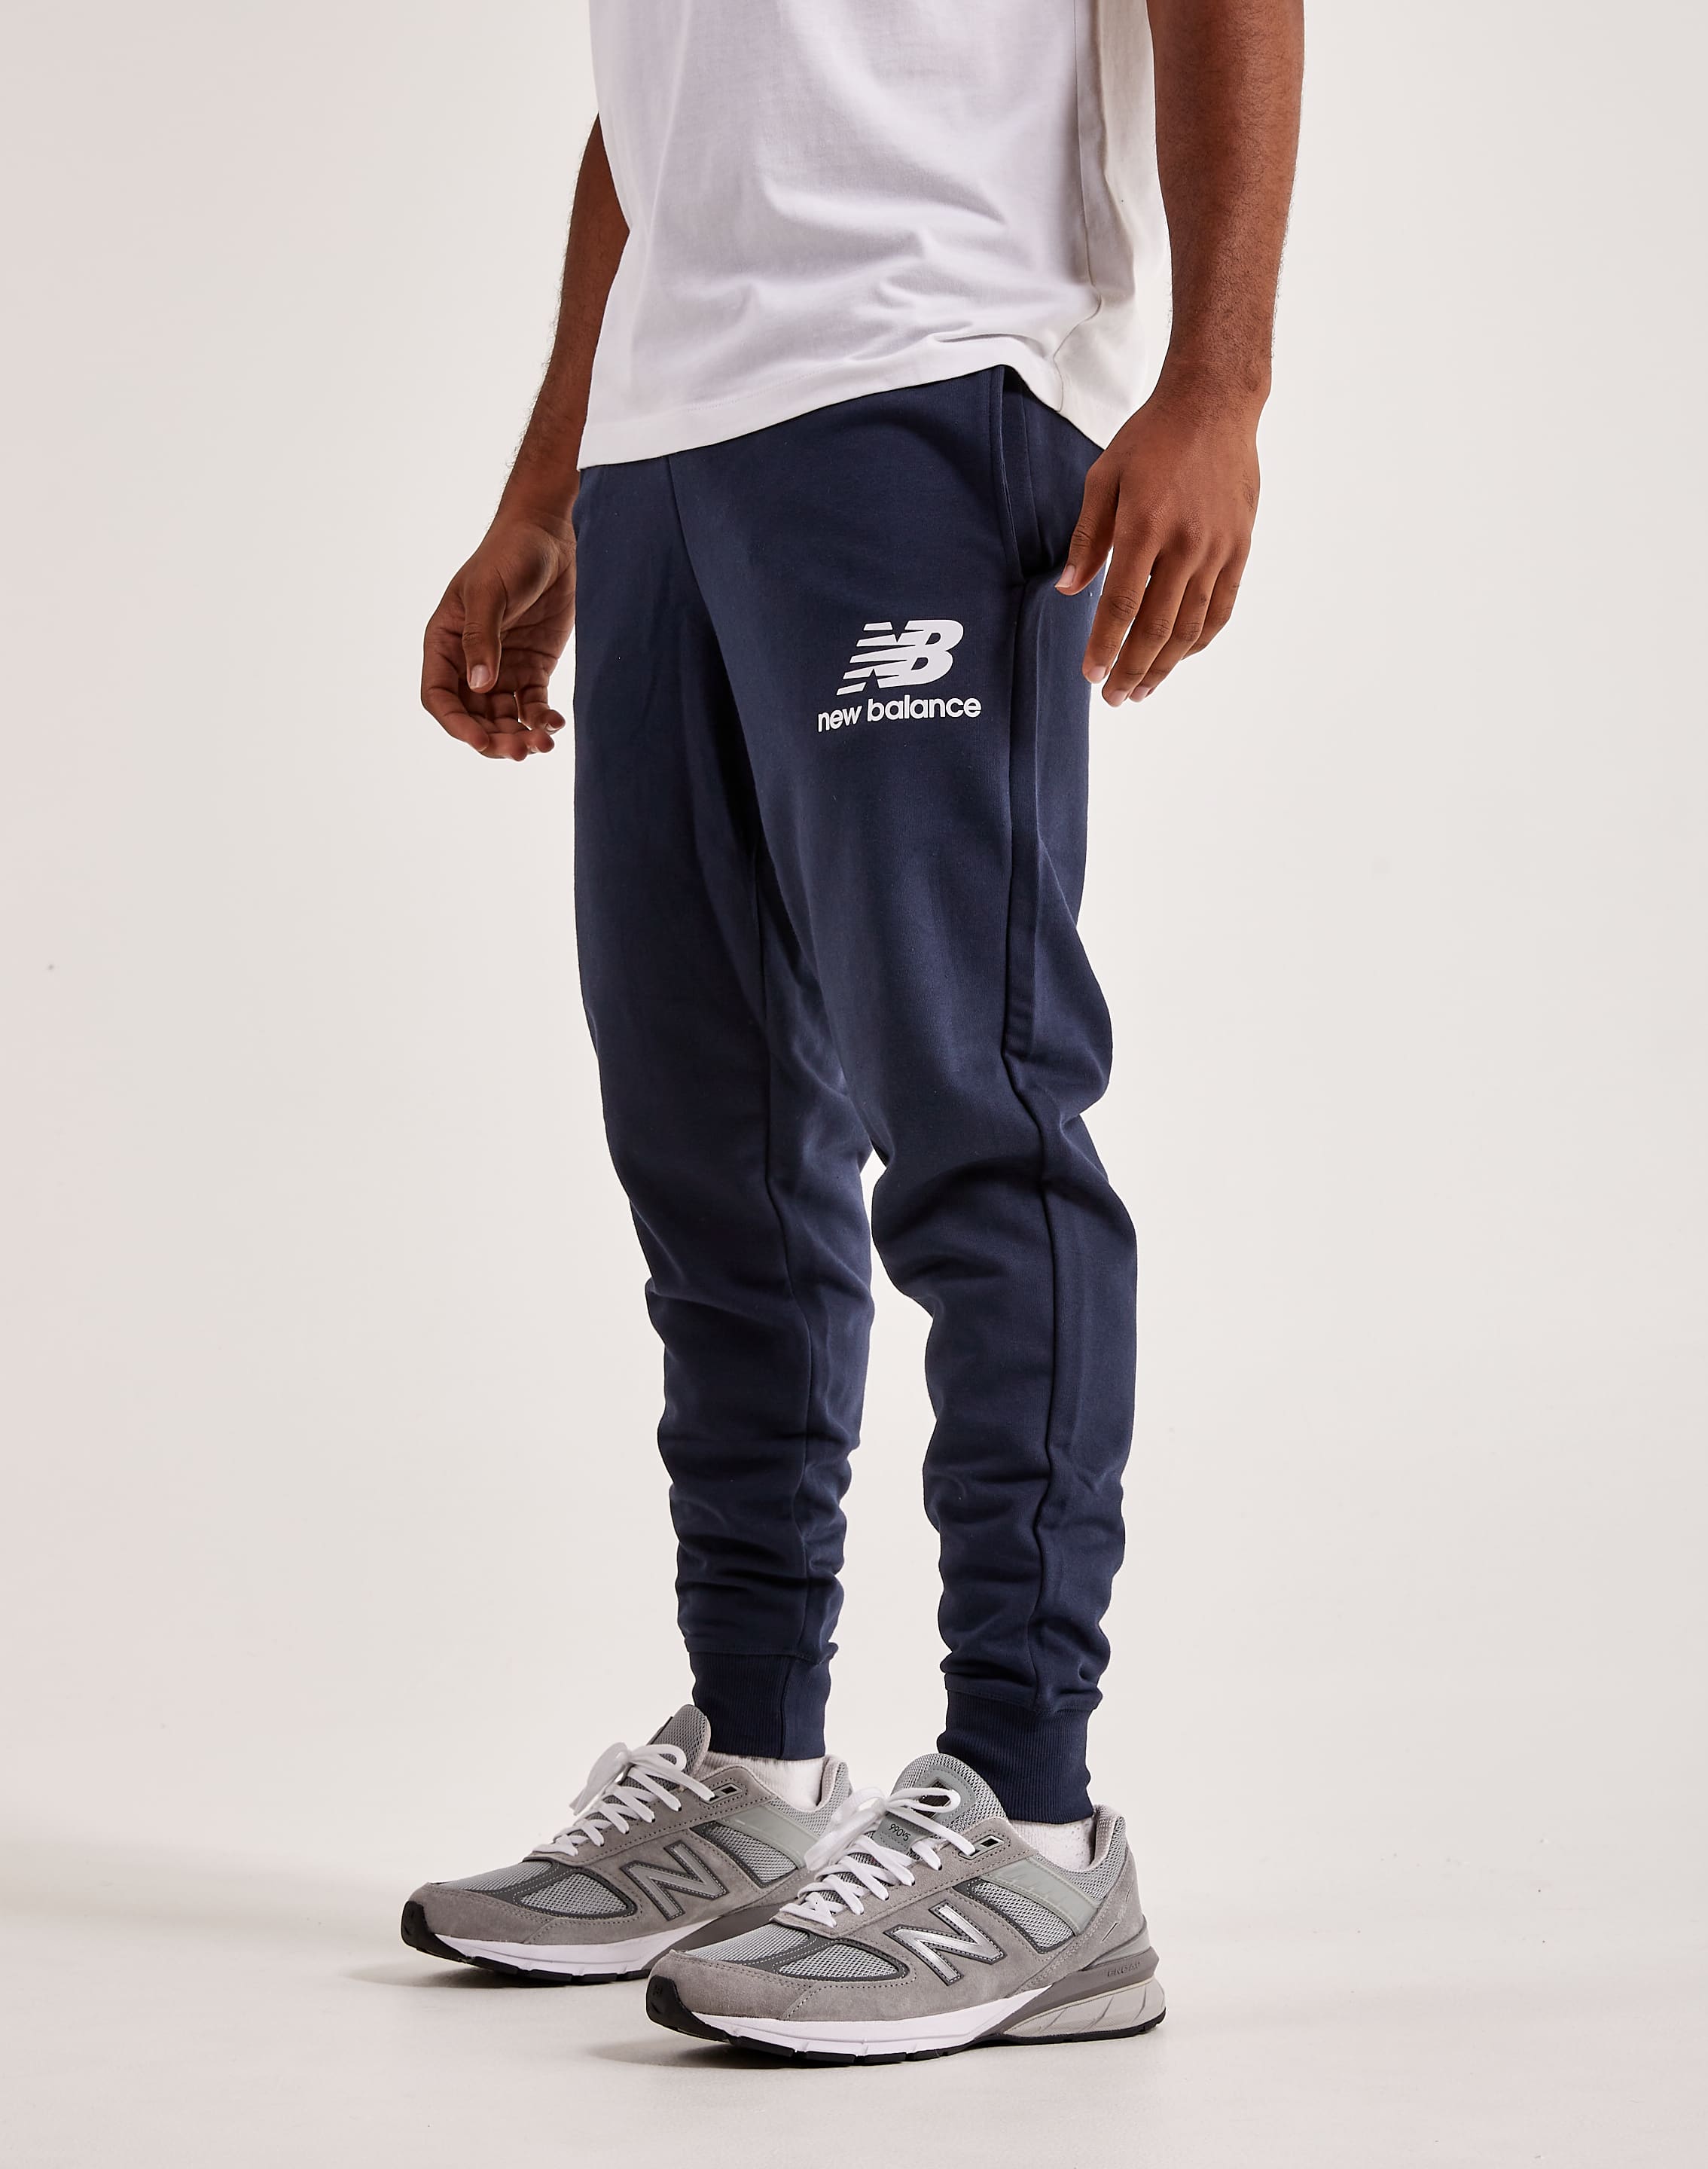 Stacked Essentials DTLR – Balance Joggers New